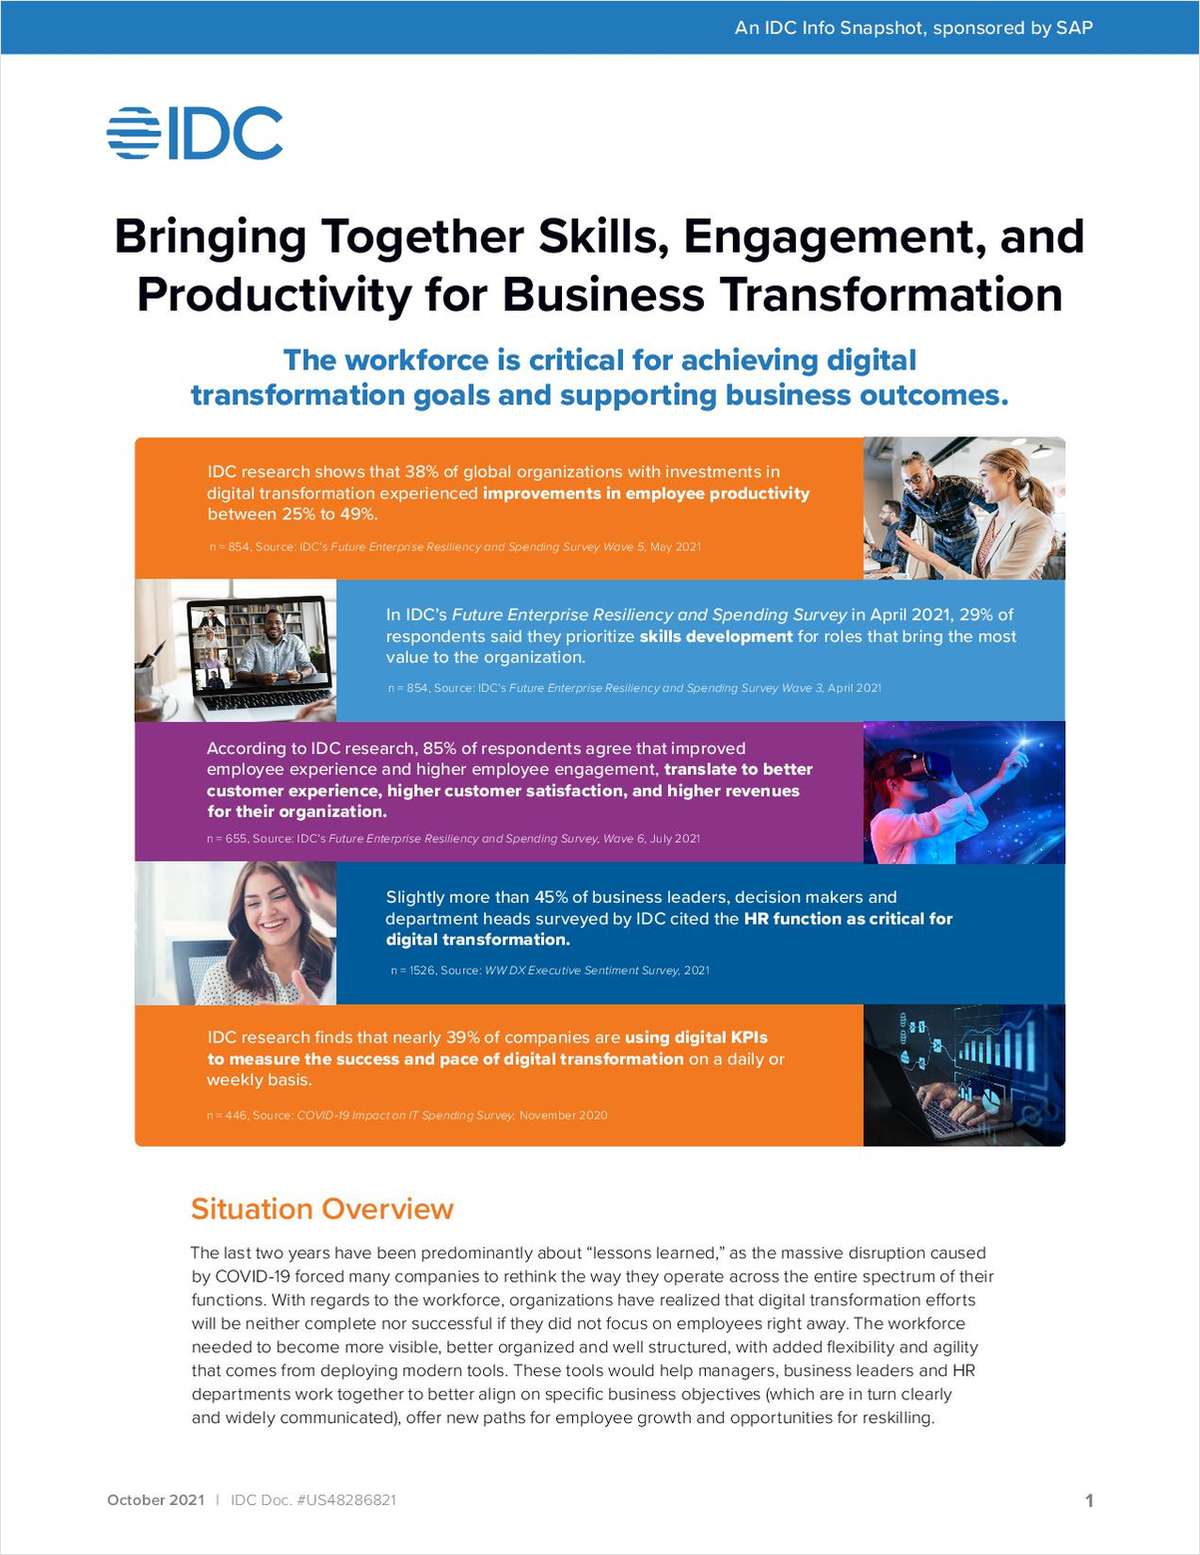 IDC Snapshot - Bringing Together Skills, Engagement, and  Productivity for Business Transformation